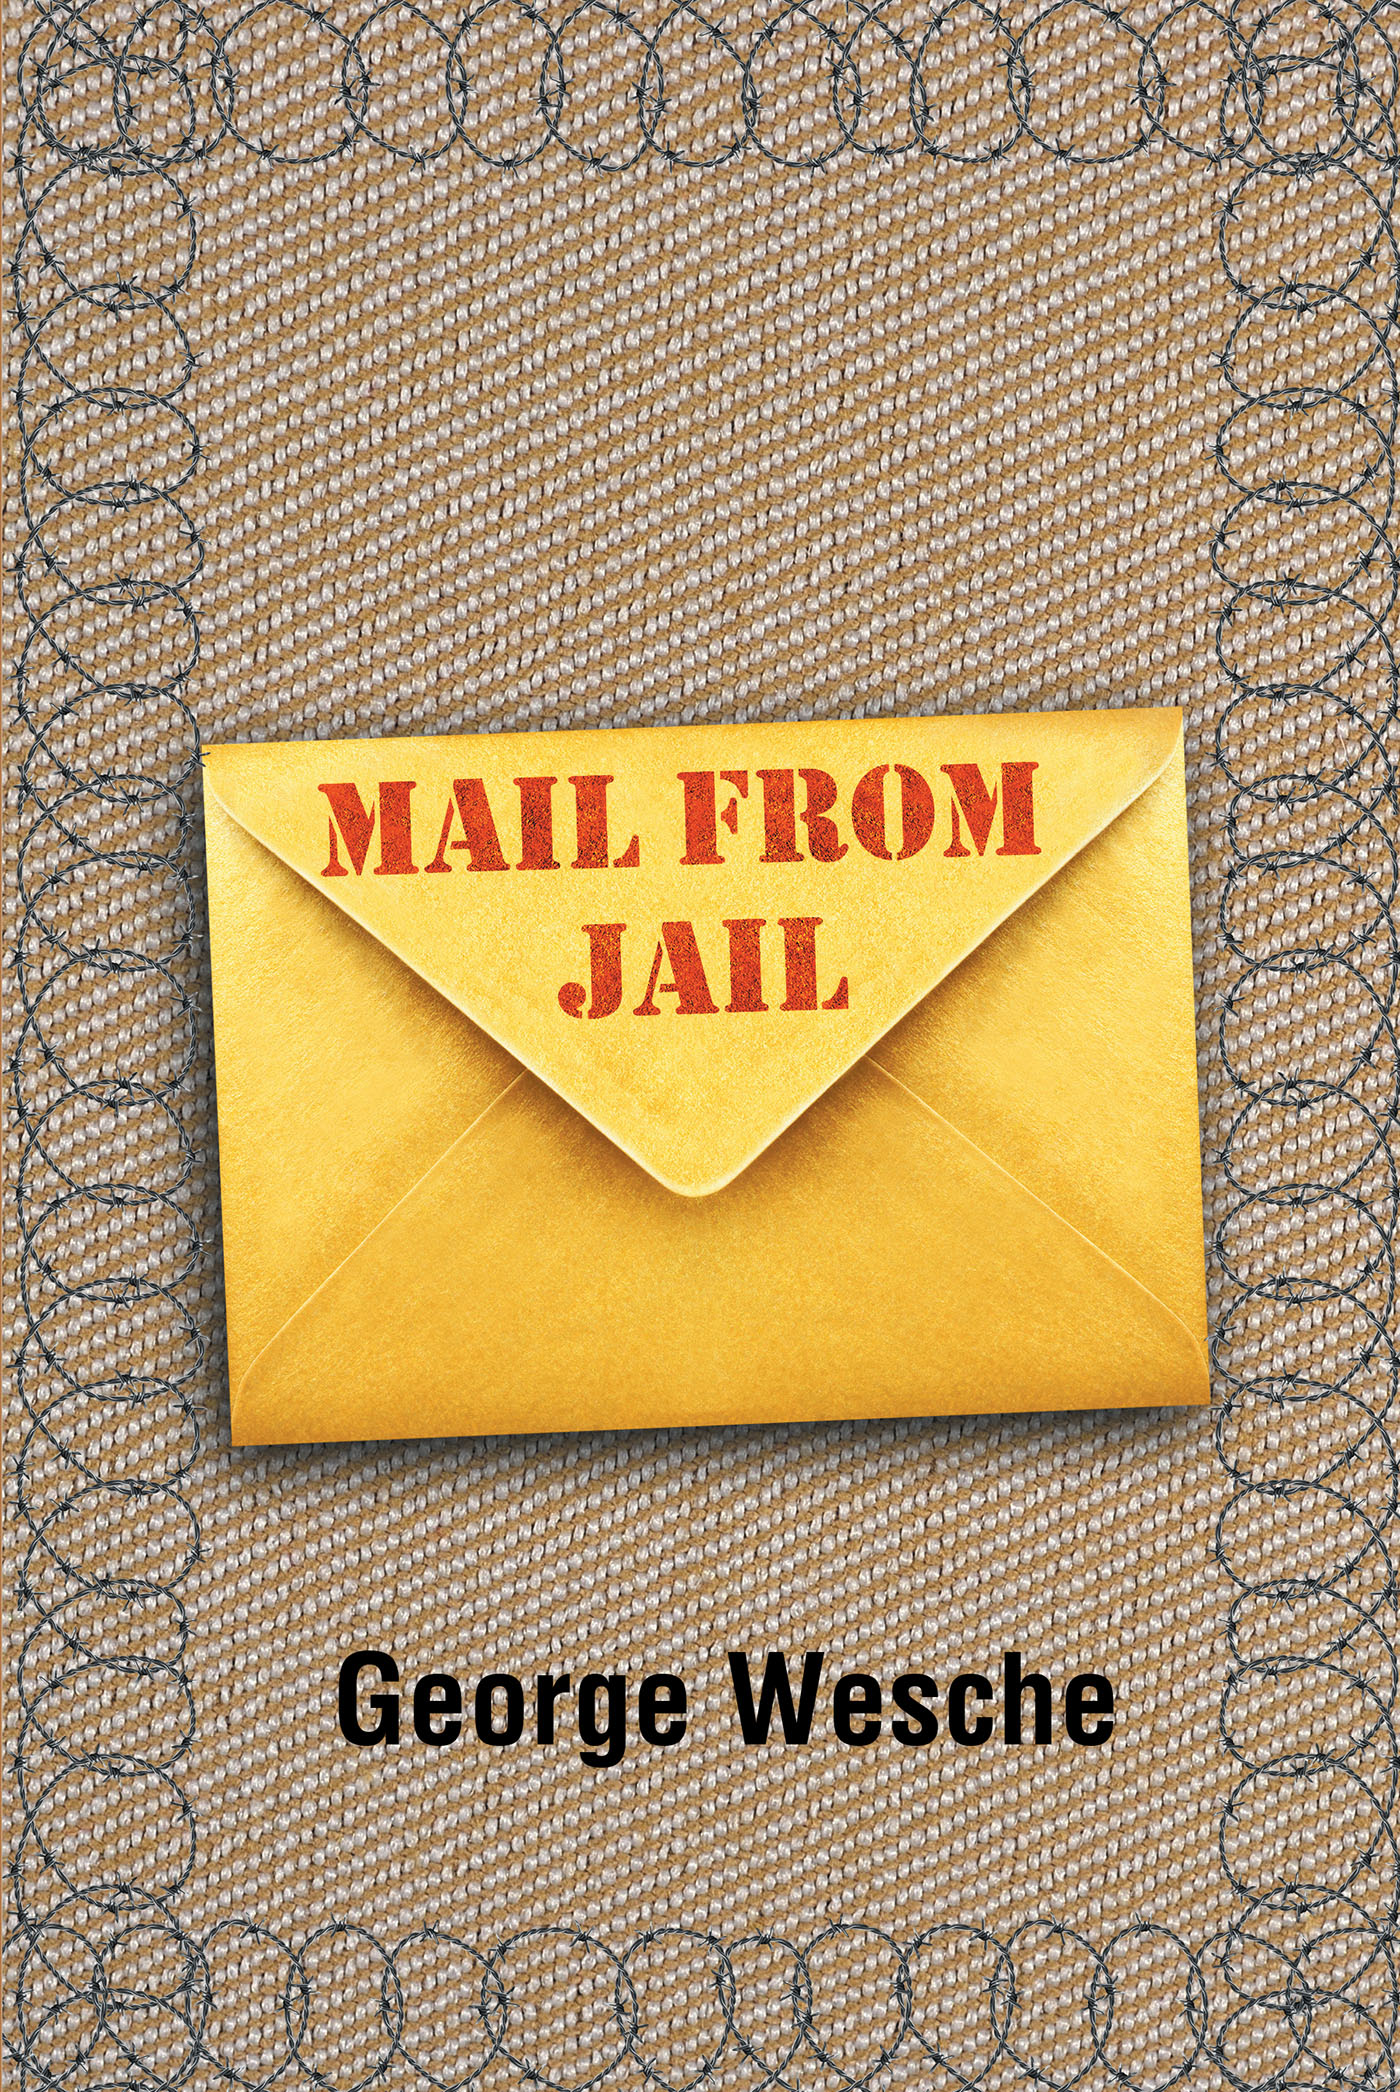 George Wesche’s New Book, "Mail from Jail," is a Fascinating and Insightful Collection of Letters Chronicling the Author’s Time Spent in Prison for Drug Offenses